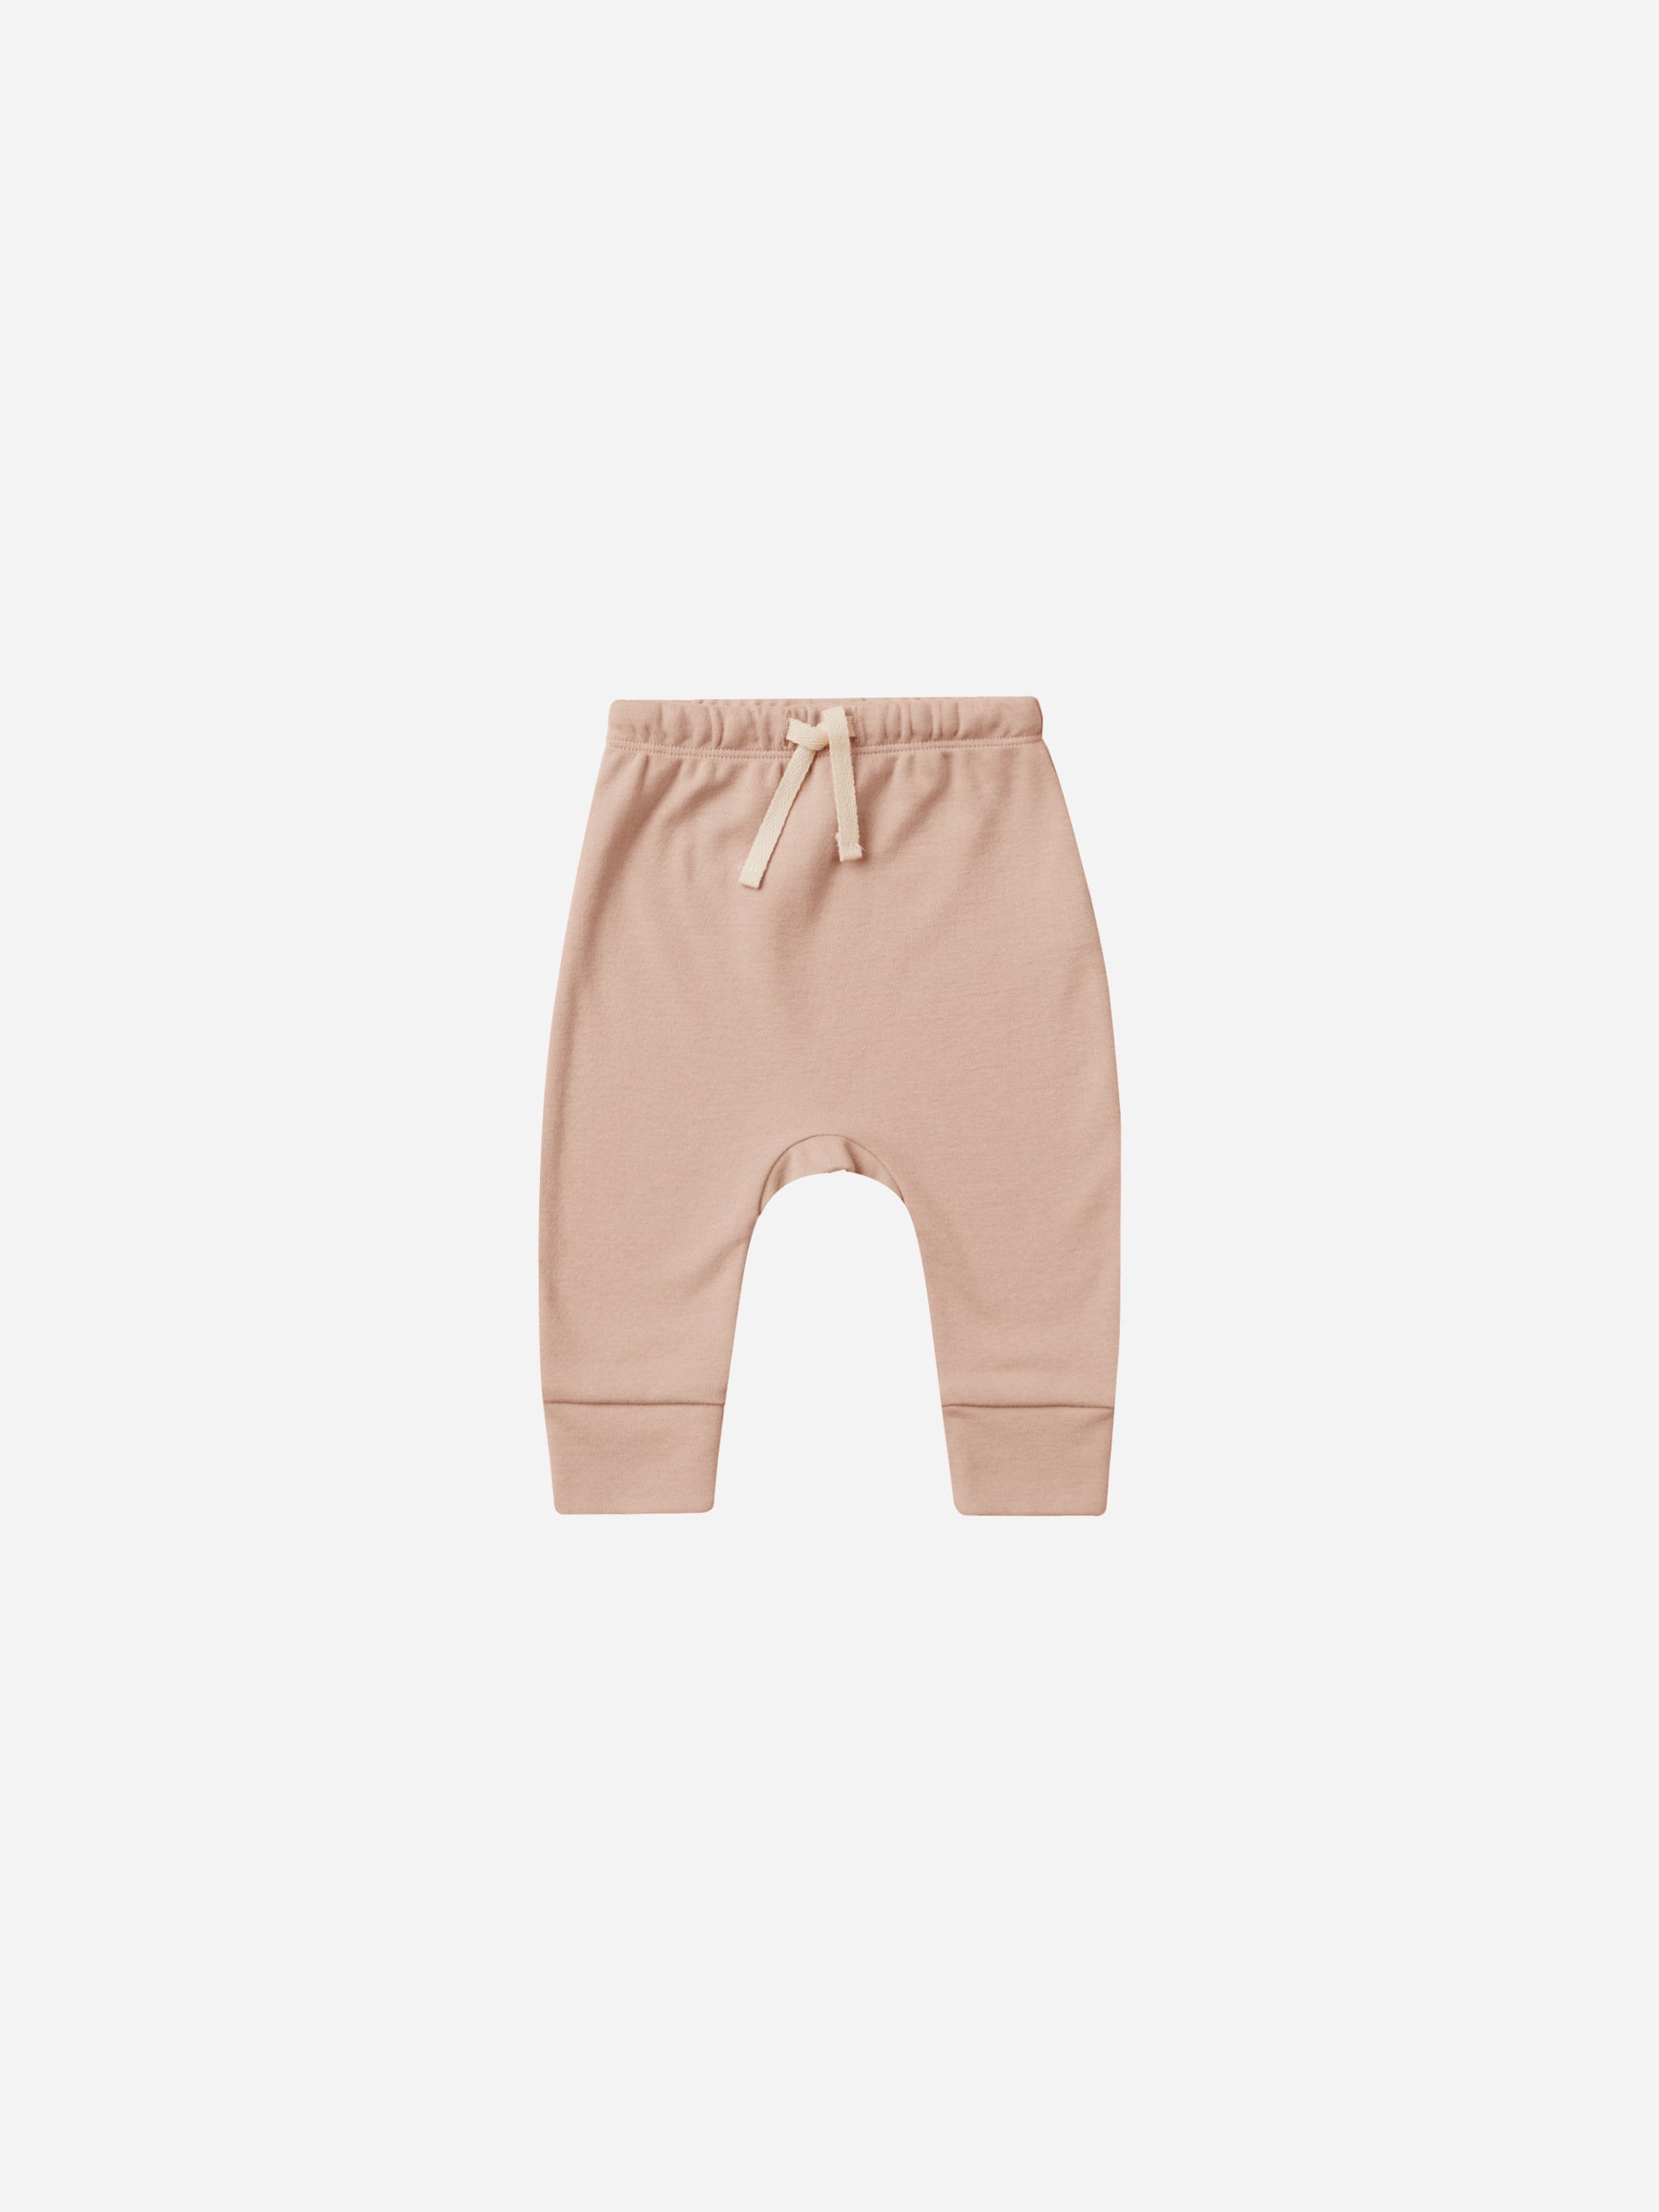 Drawstring Pant || Blush - Rylee + Cru | Kids Clothes | Trendy Baby Clothes | Modern Infant Outfits |